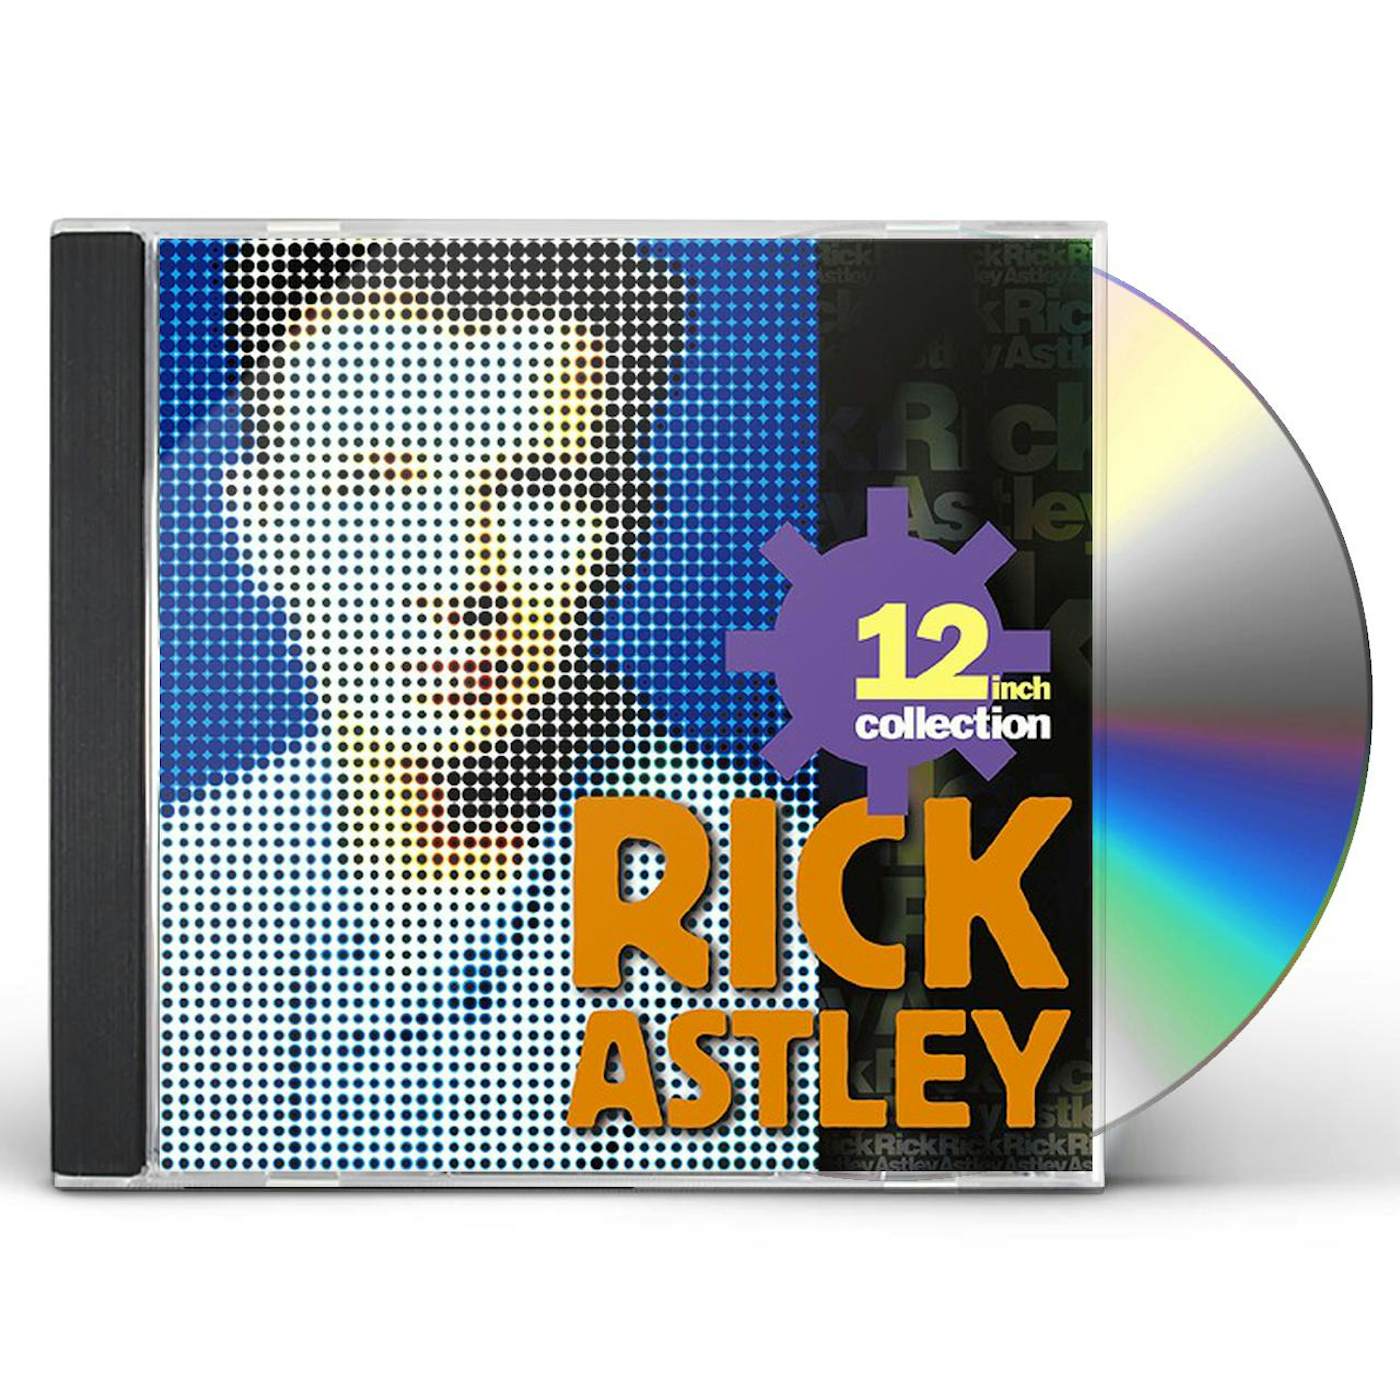 Rick Astley 12 INCH COLLECTION CD